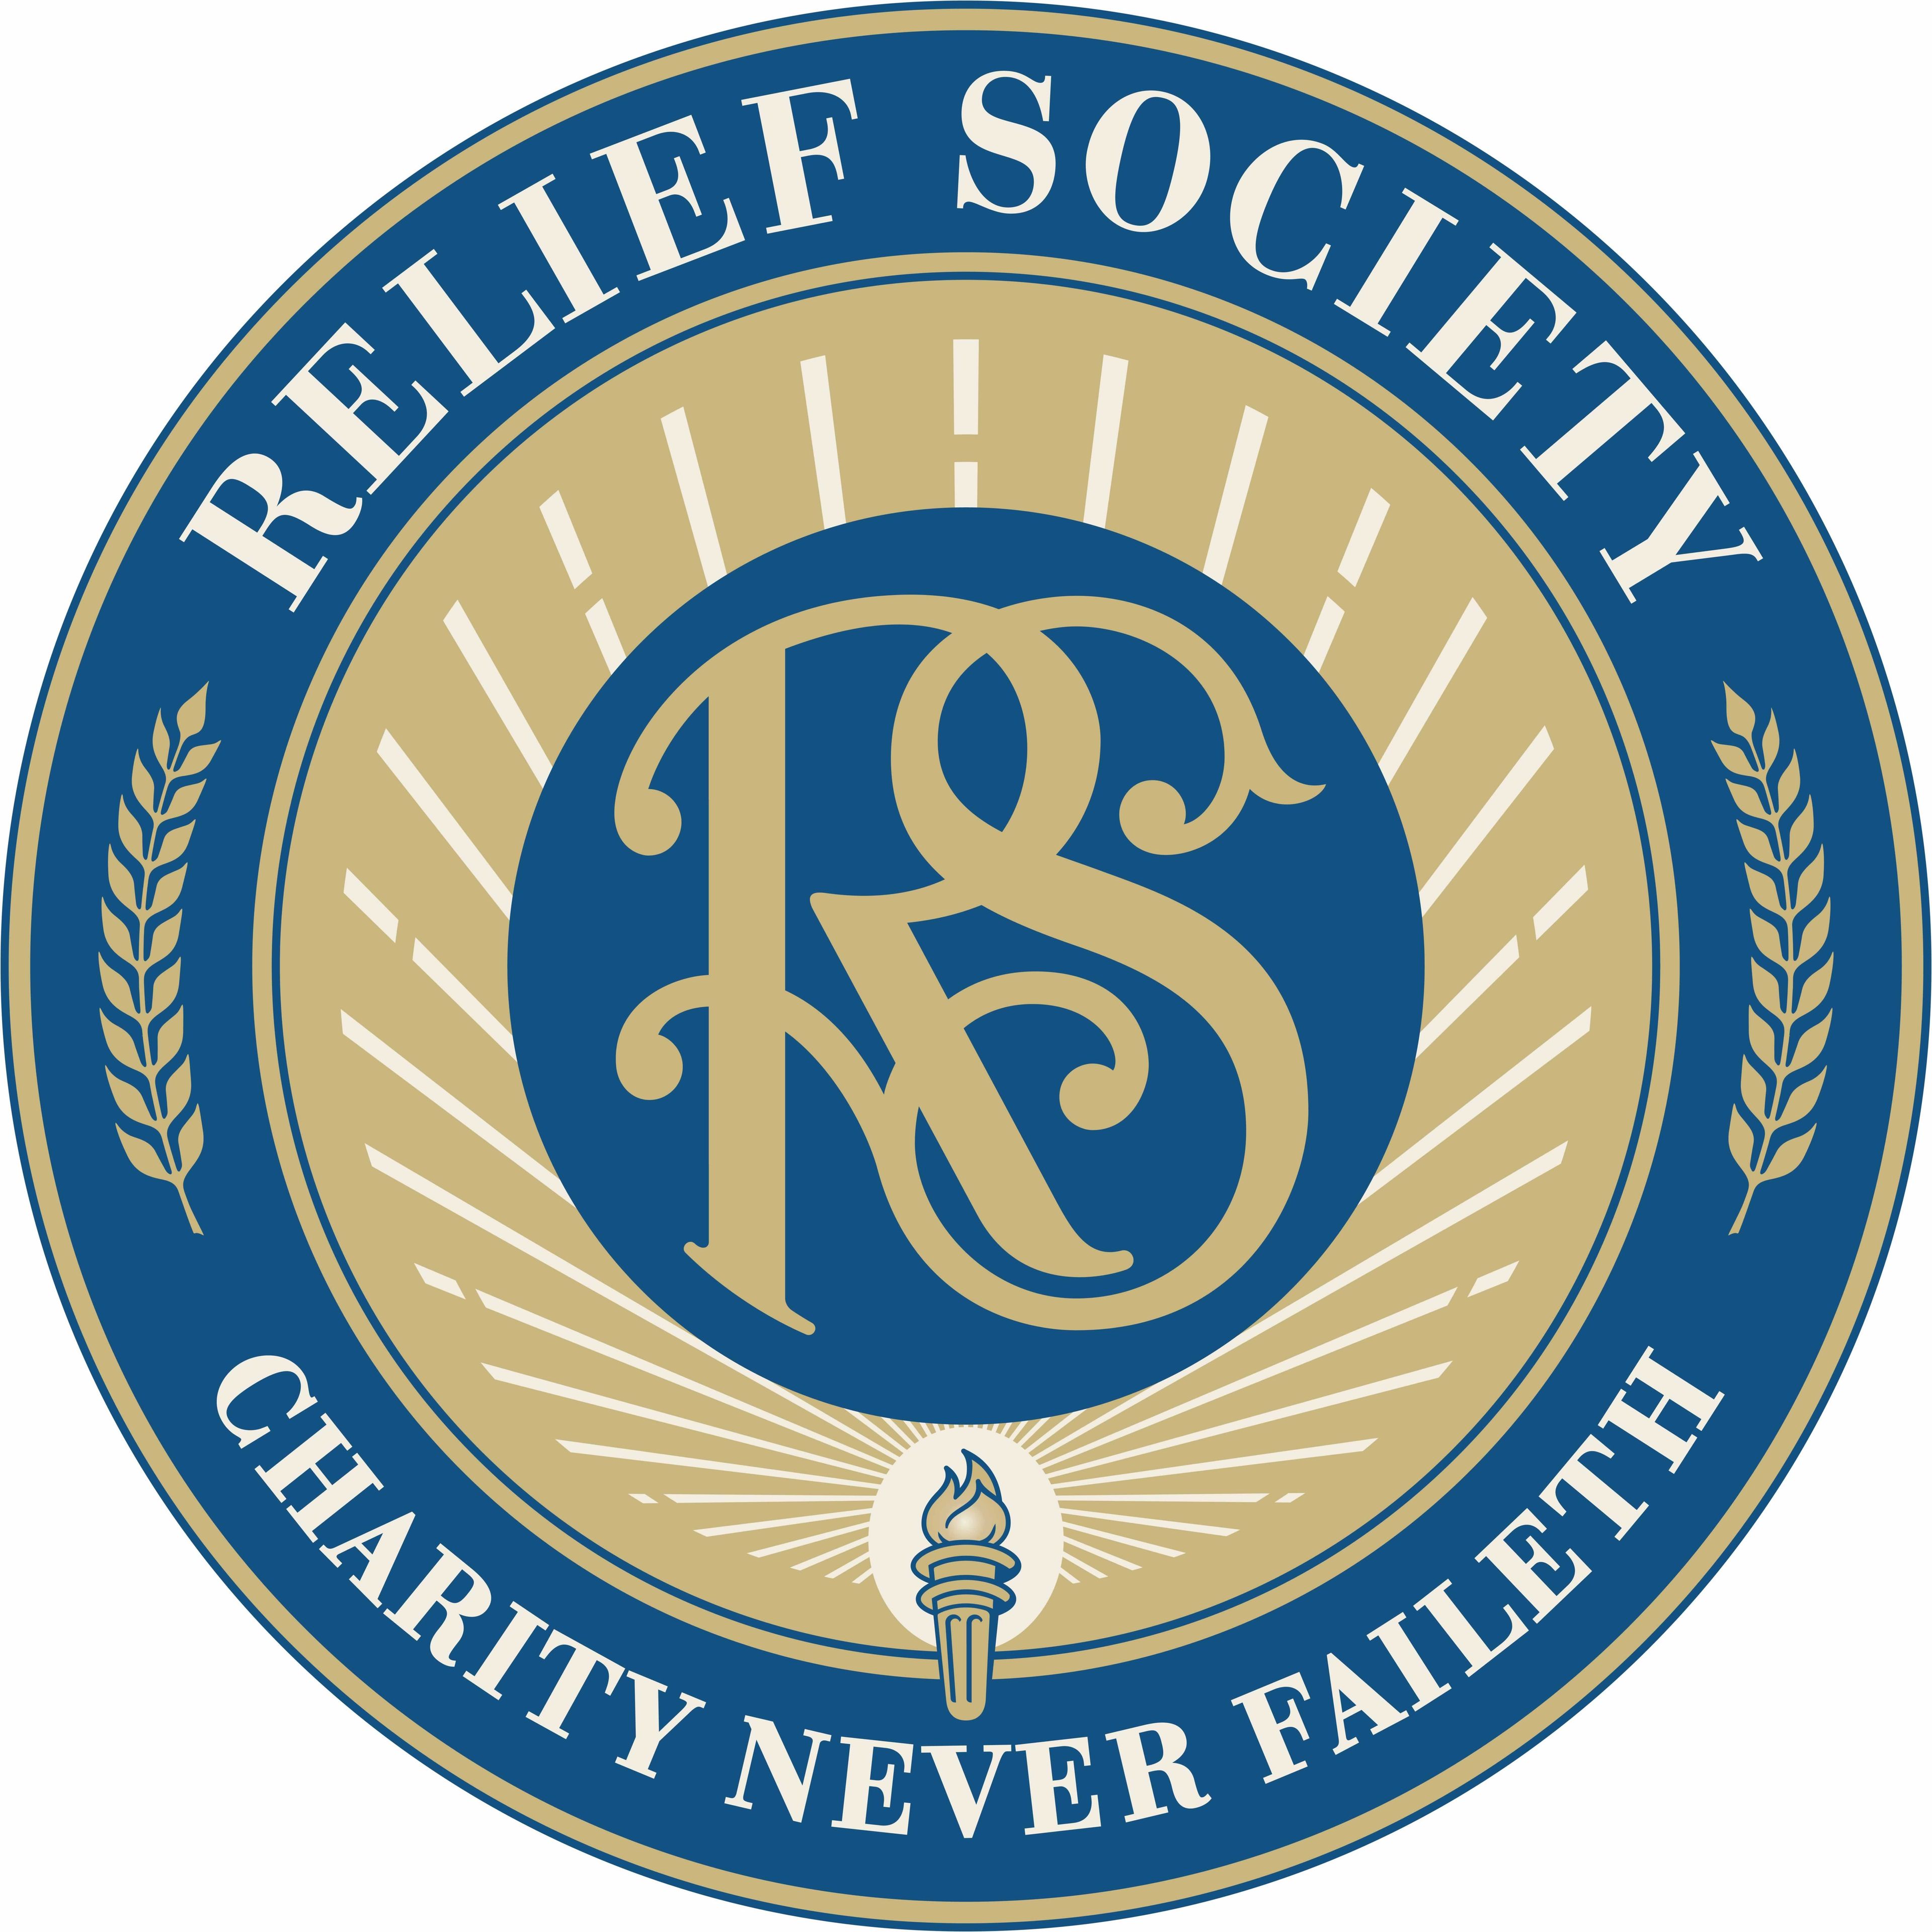 The Relief Society seal.